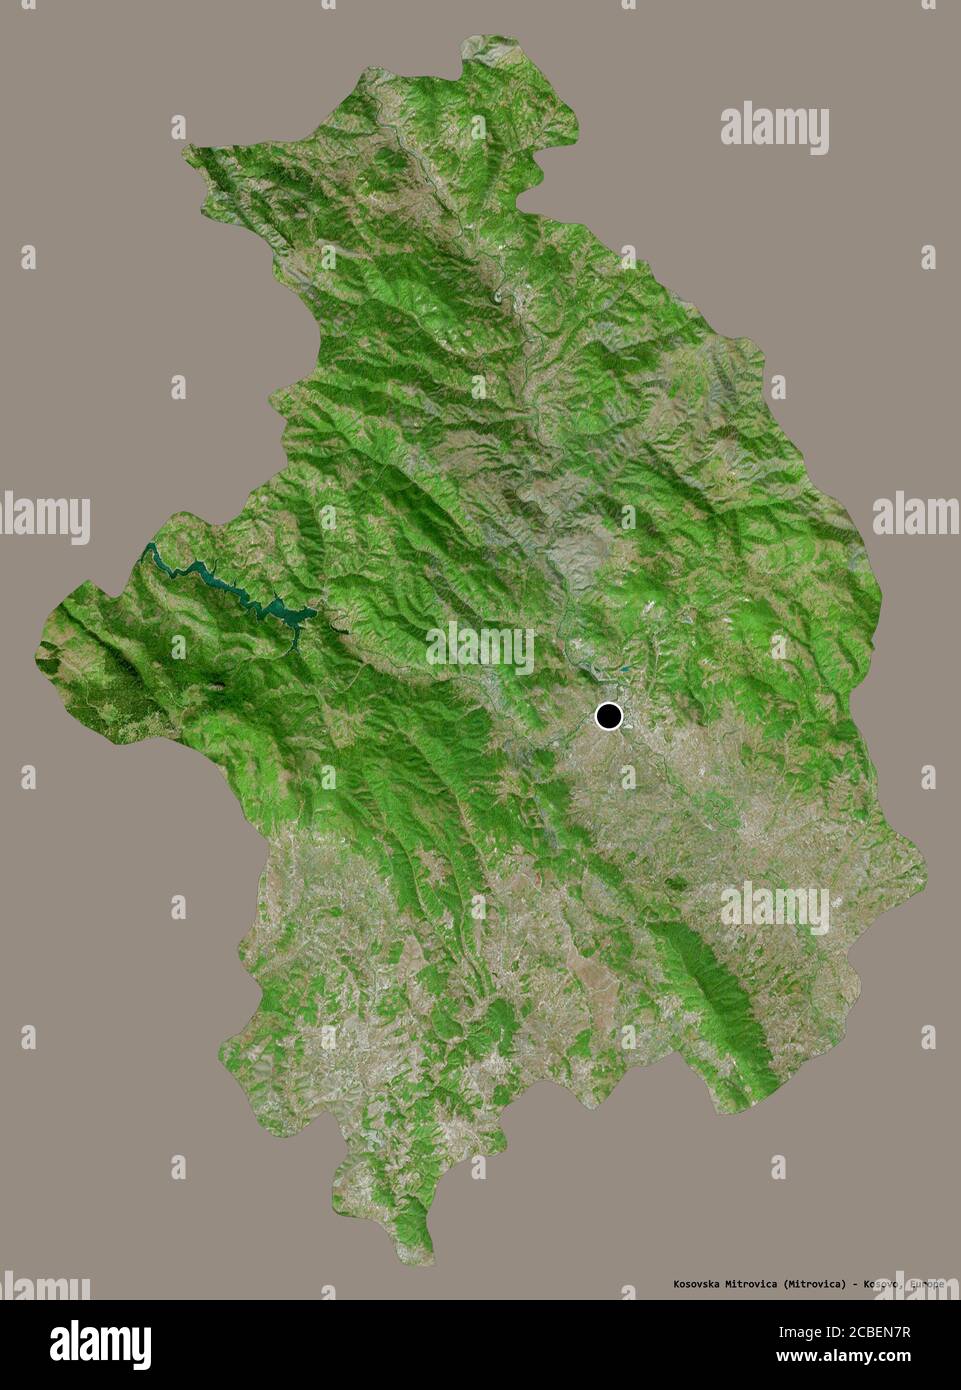 Shape of Kosovska Mitrovica, district of Kosovo, with its capital isolated on a solid color background. Satellite imagery. 3D rendering Stock Photo